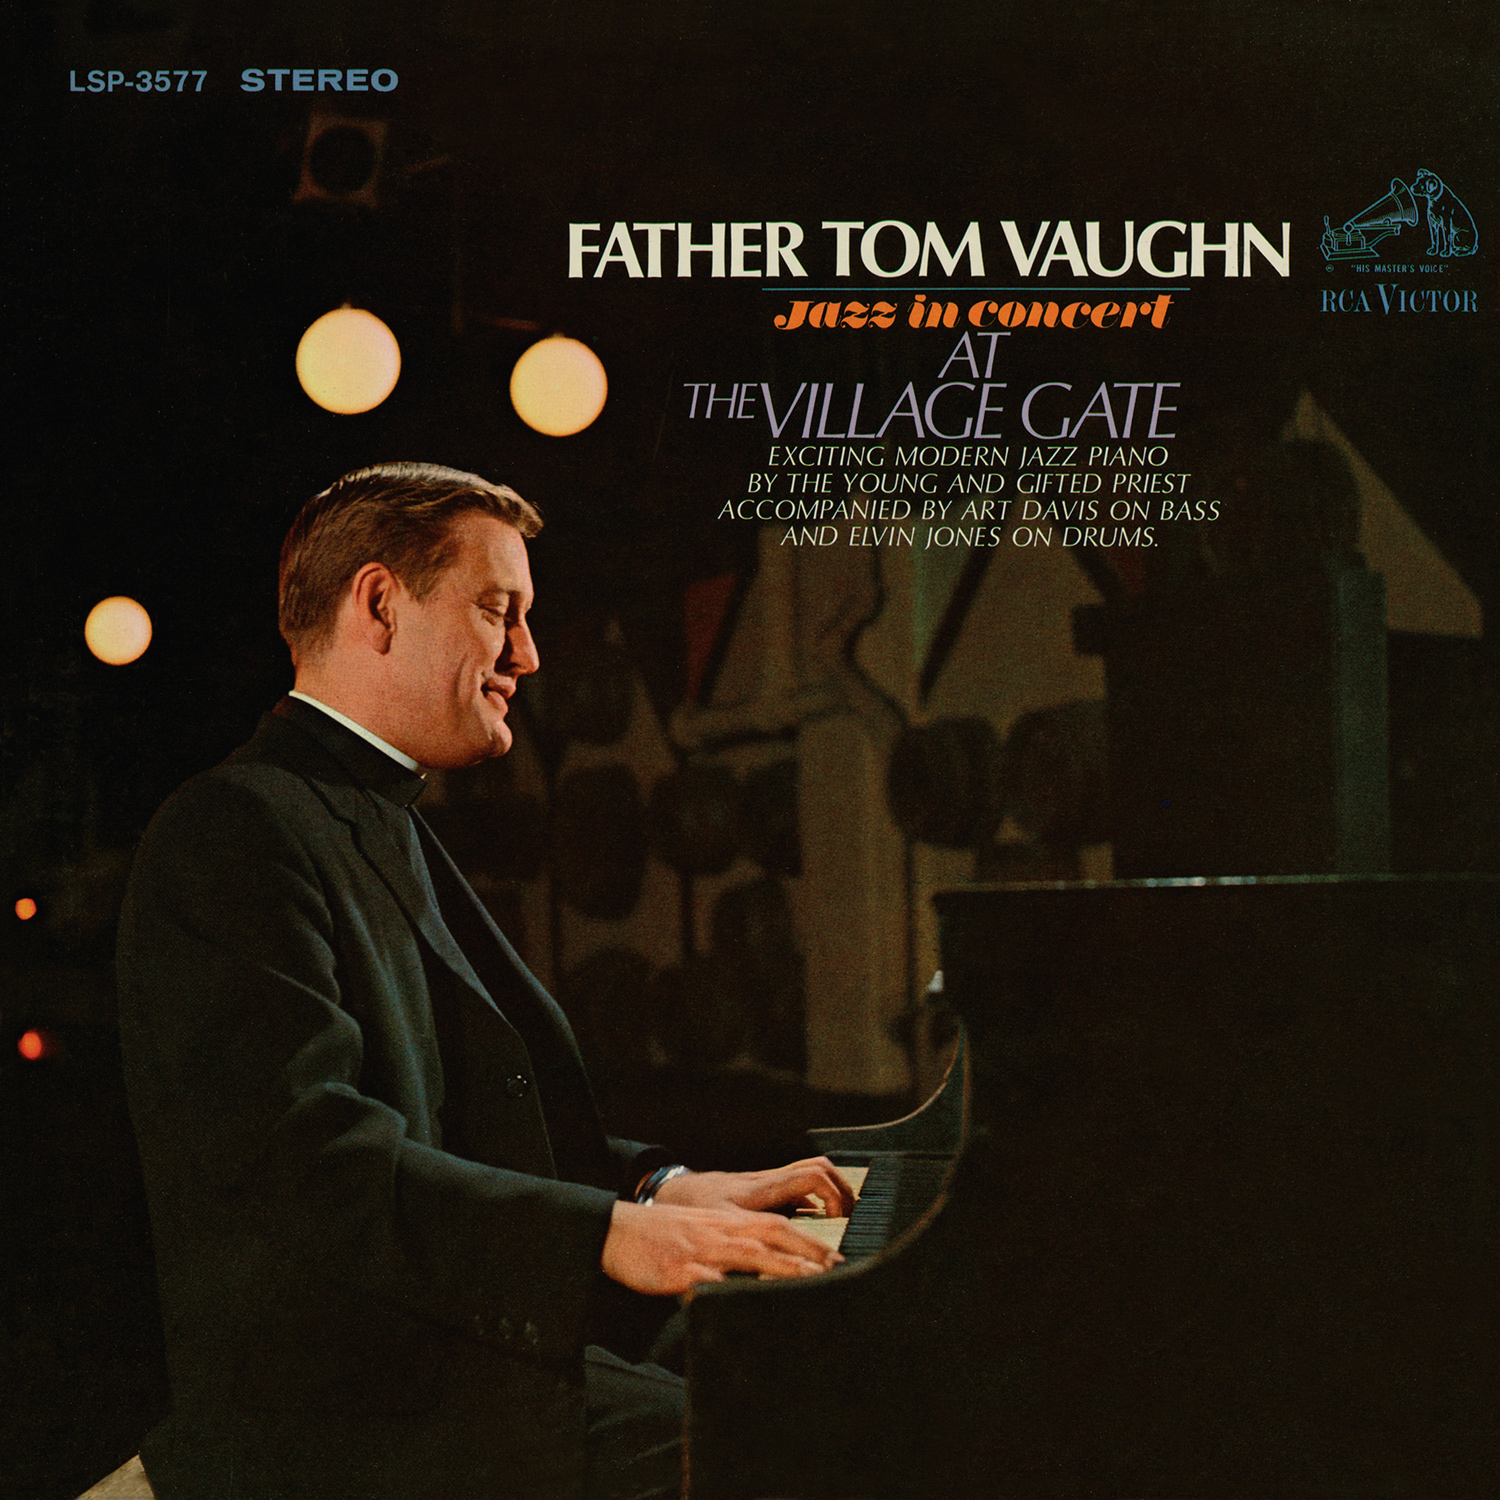 Father Tom Vaughn - Jazz In Concert At The Village Gate (1966/2016) [HDTracks FLAC 24bit/192kHz]